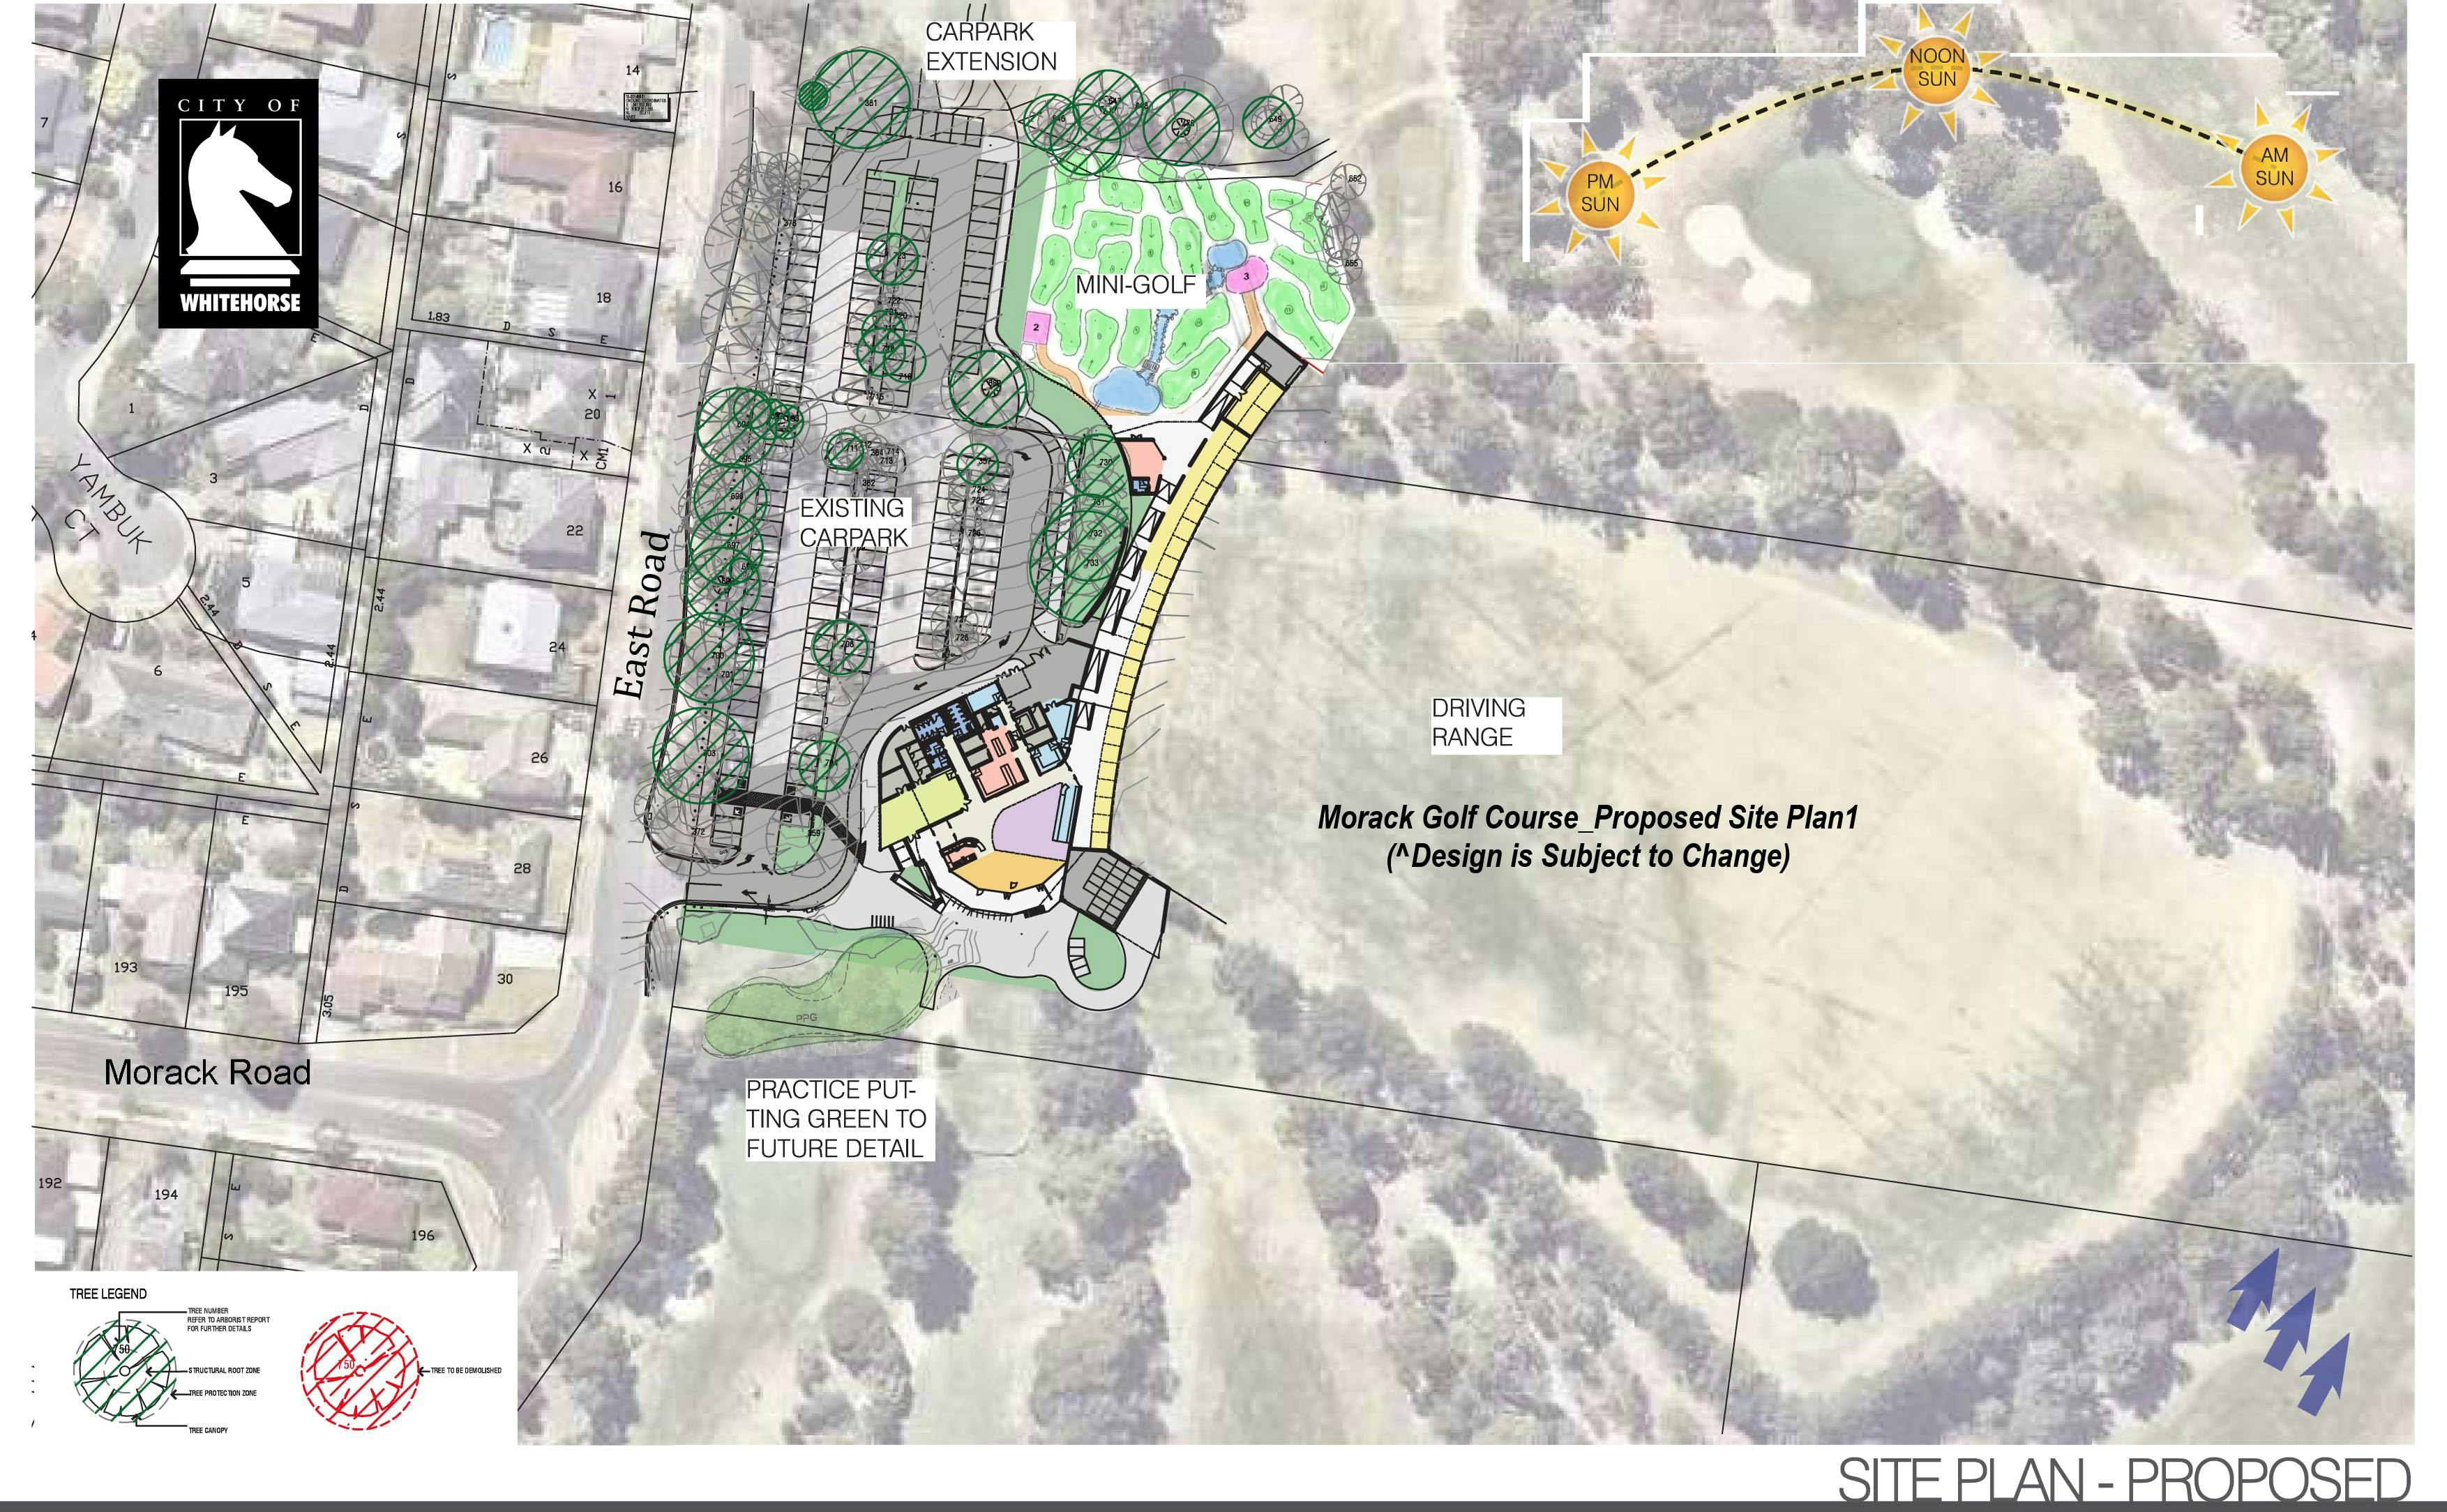 Morack Golf Course Redevelopment proposed site plan 1 